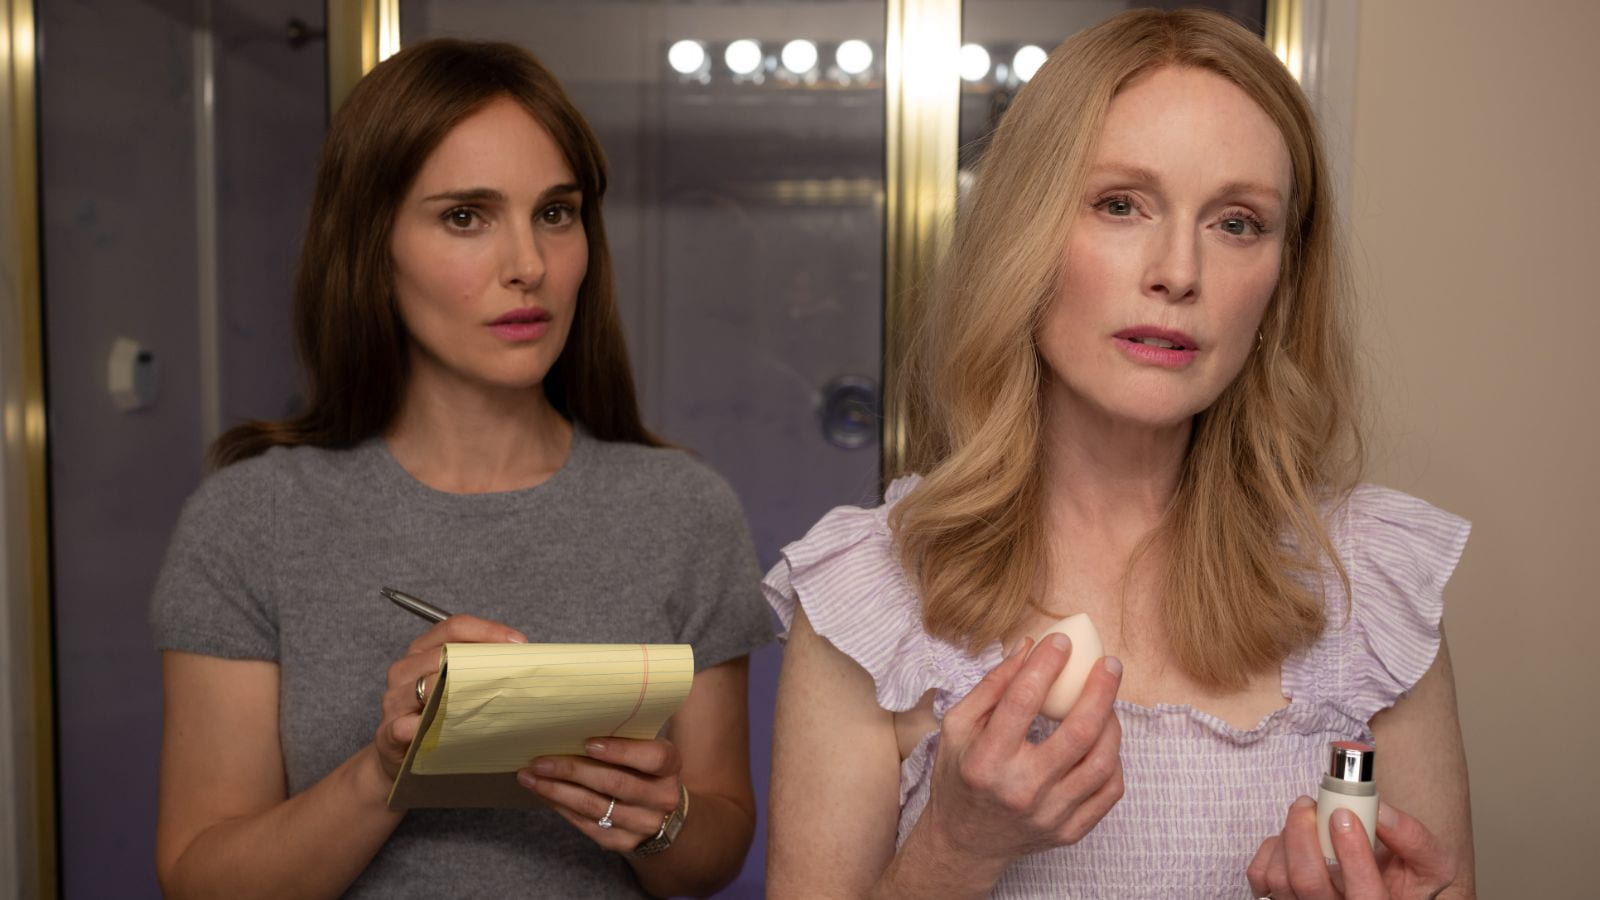 Natalie Portman and Julianne Moore look at each other in a bathroom mirror